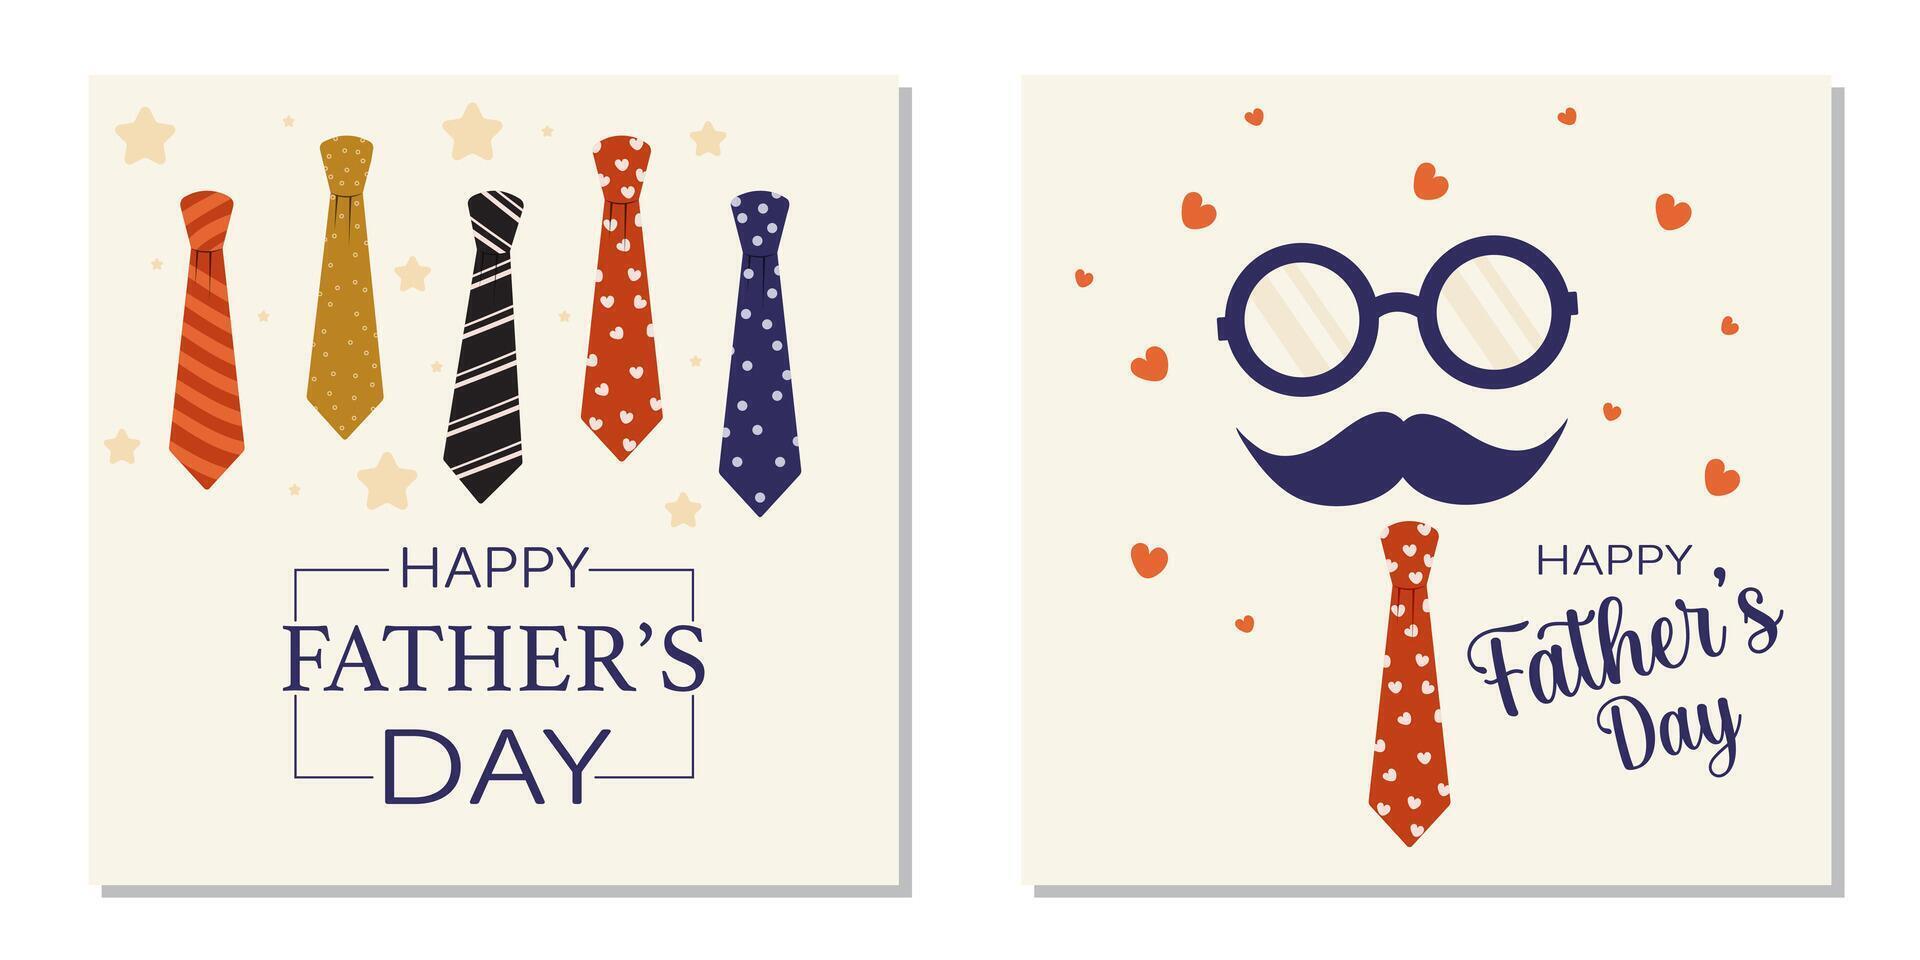 Set of Father's Day greeting background with neckties, mustache, and red hearts. Vector illustration for posters, banners, promotional materials, and cards.